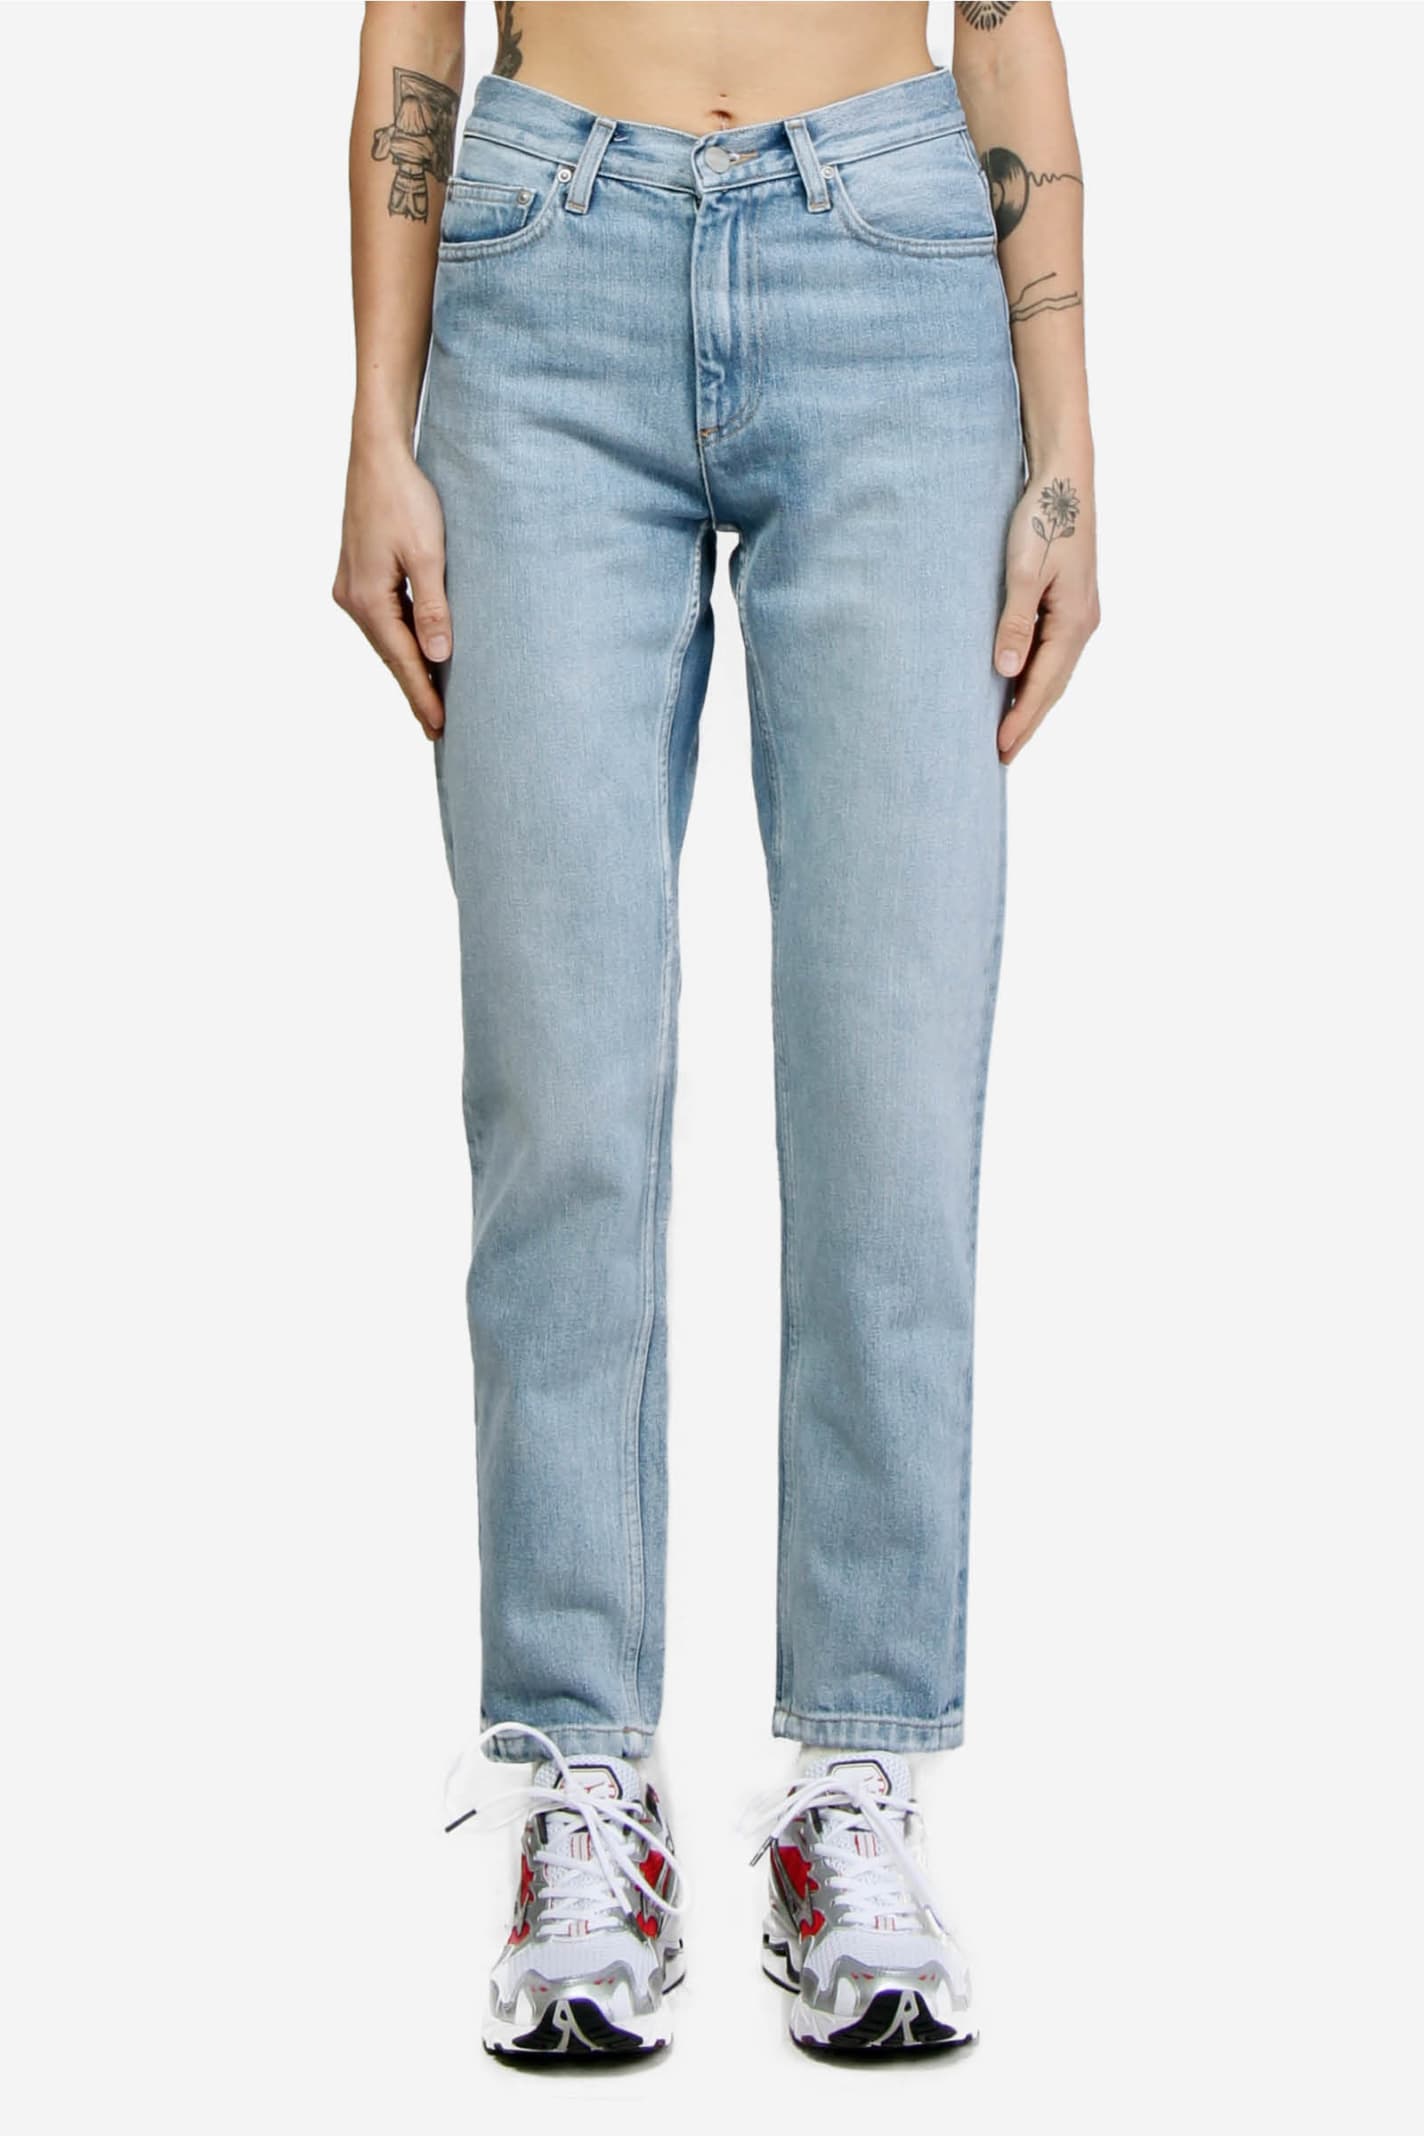 Carhartt Page Carrot Jeans